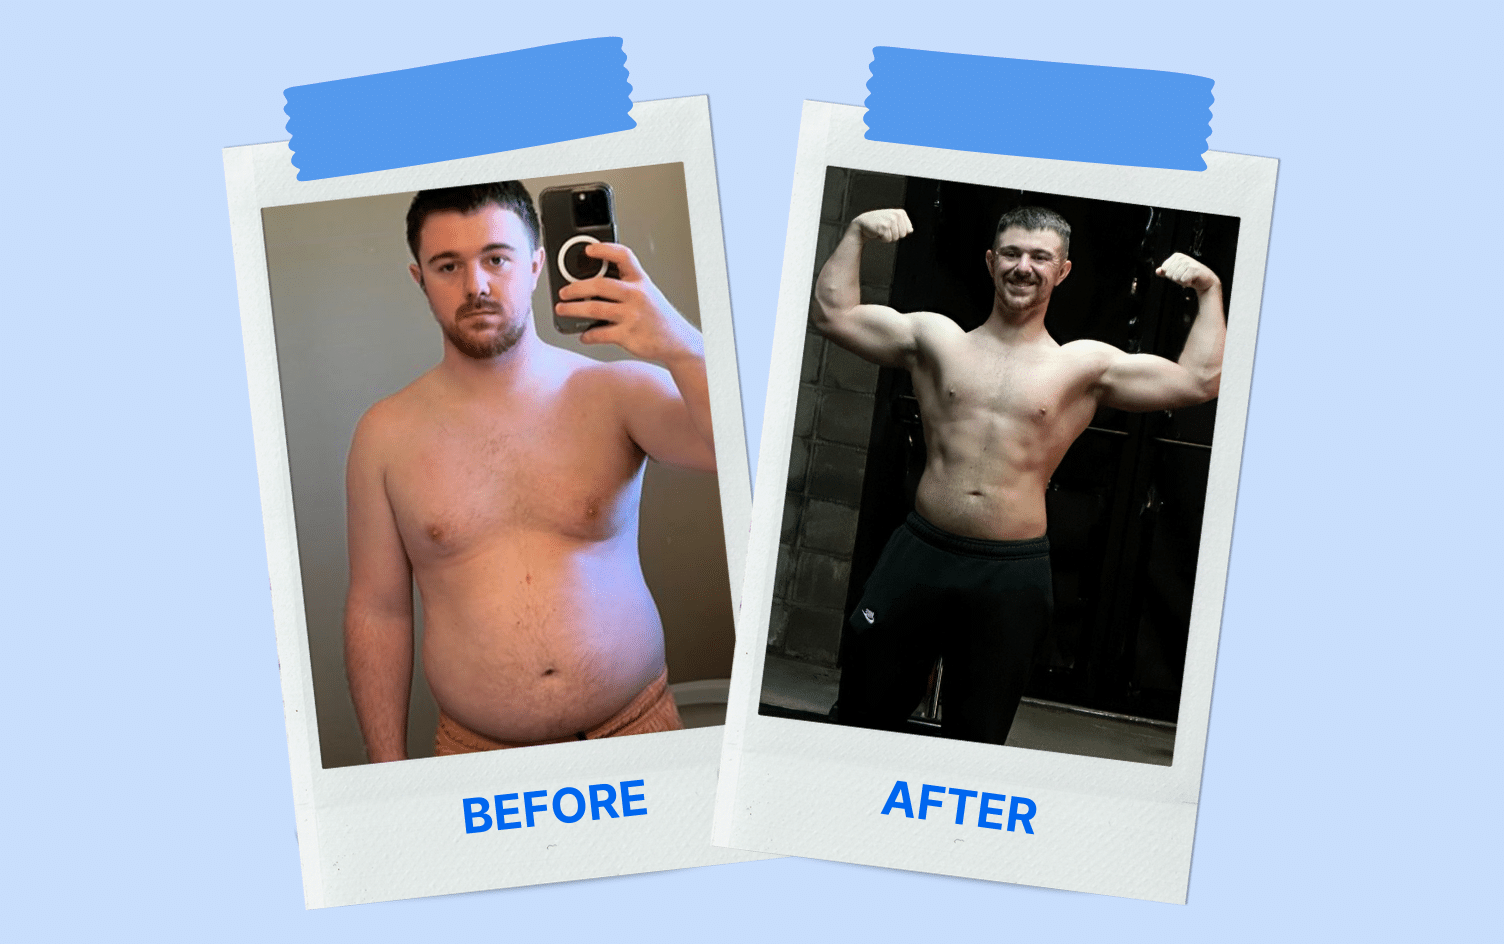 How Dillion Lost 40 Pounds in 100 Days | MyFitnessPal